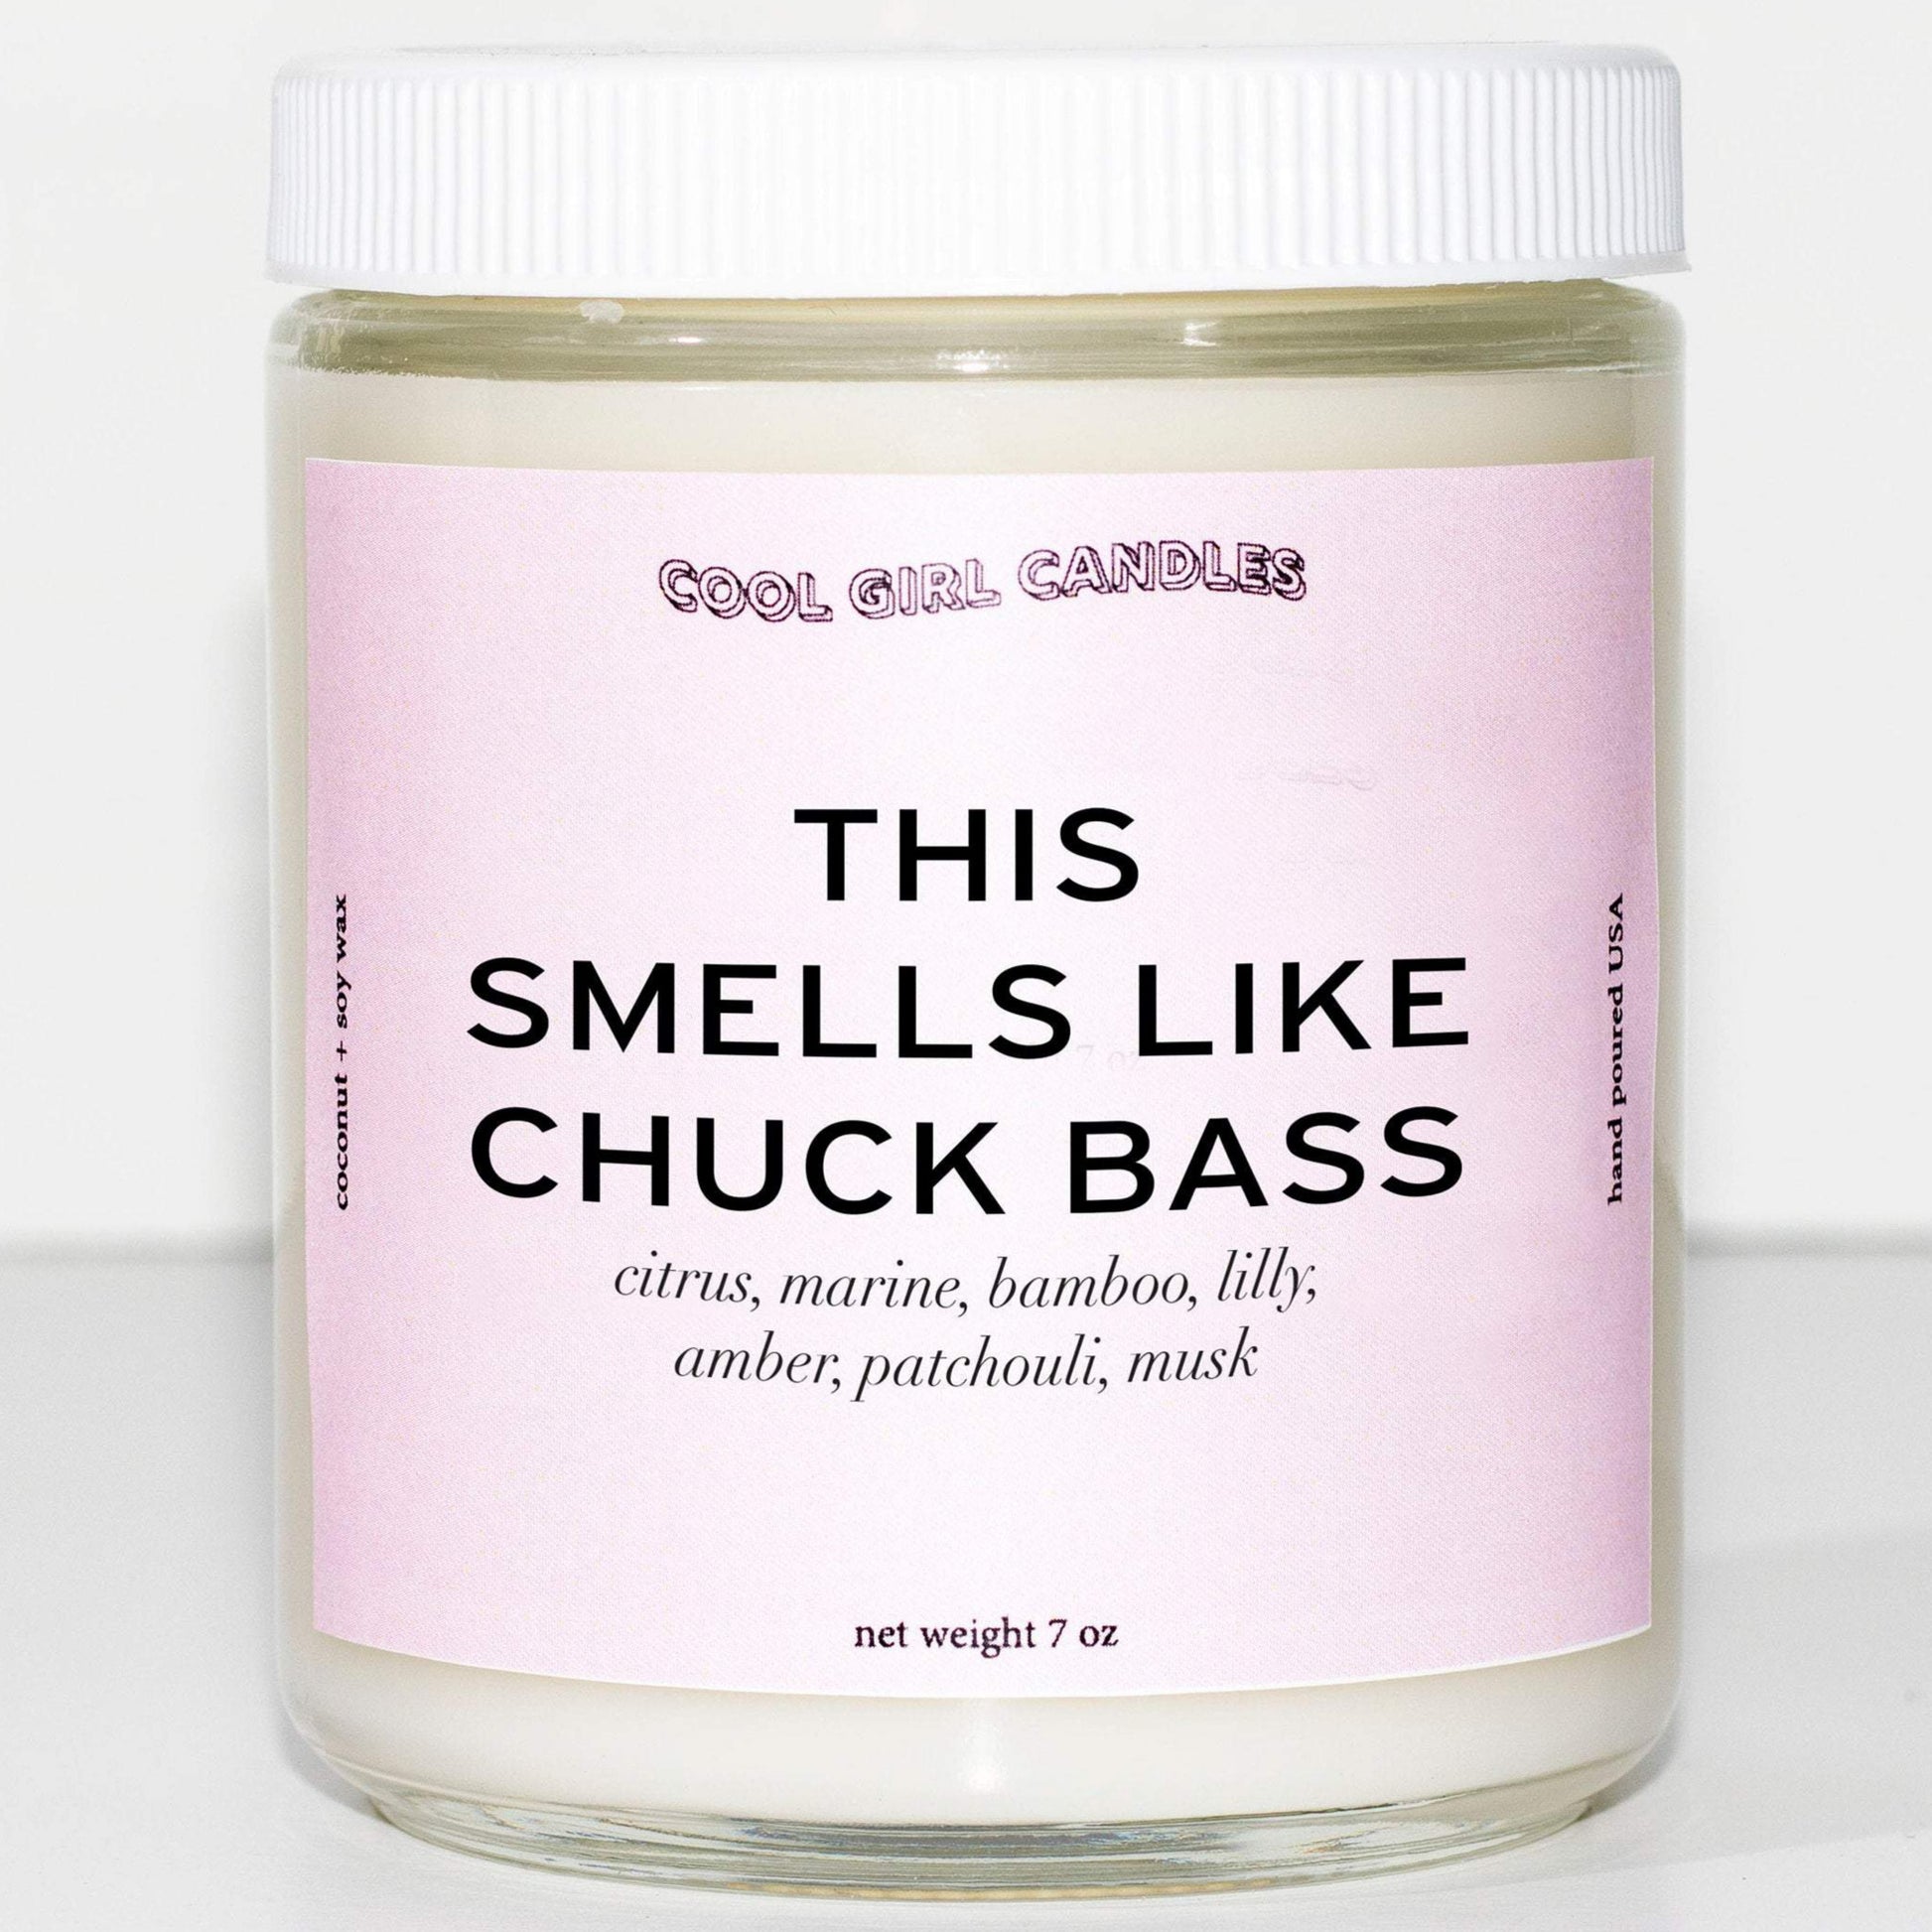 this smells like chuck bass candle cute pink aesthetic candle chuck bass merch gossip girl candle ed westwick candle